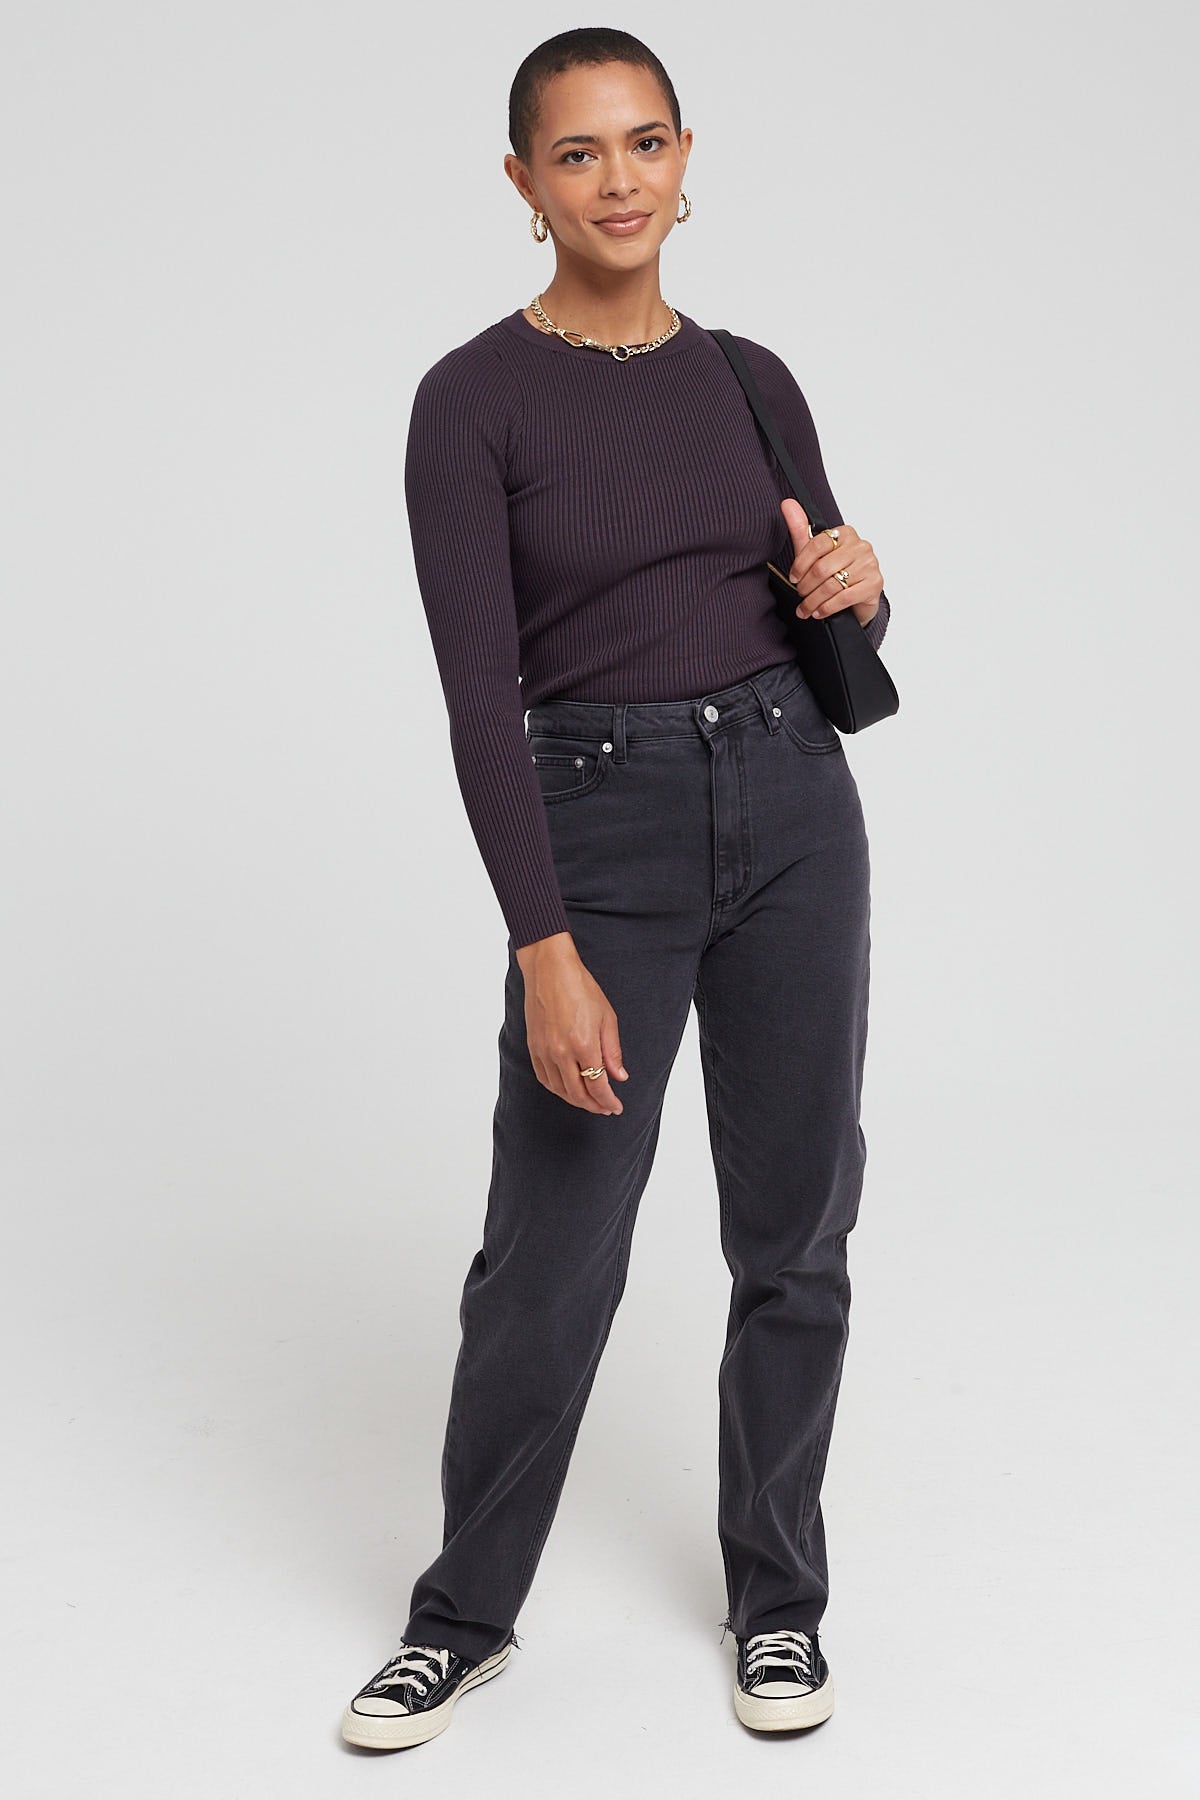 Perfect Stranger Basic Long Sleeve Knit Top Charcoal